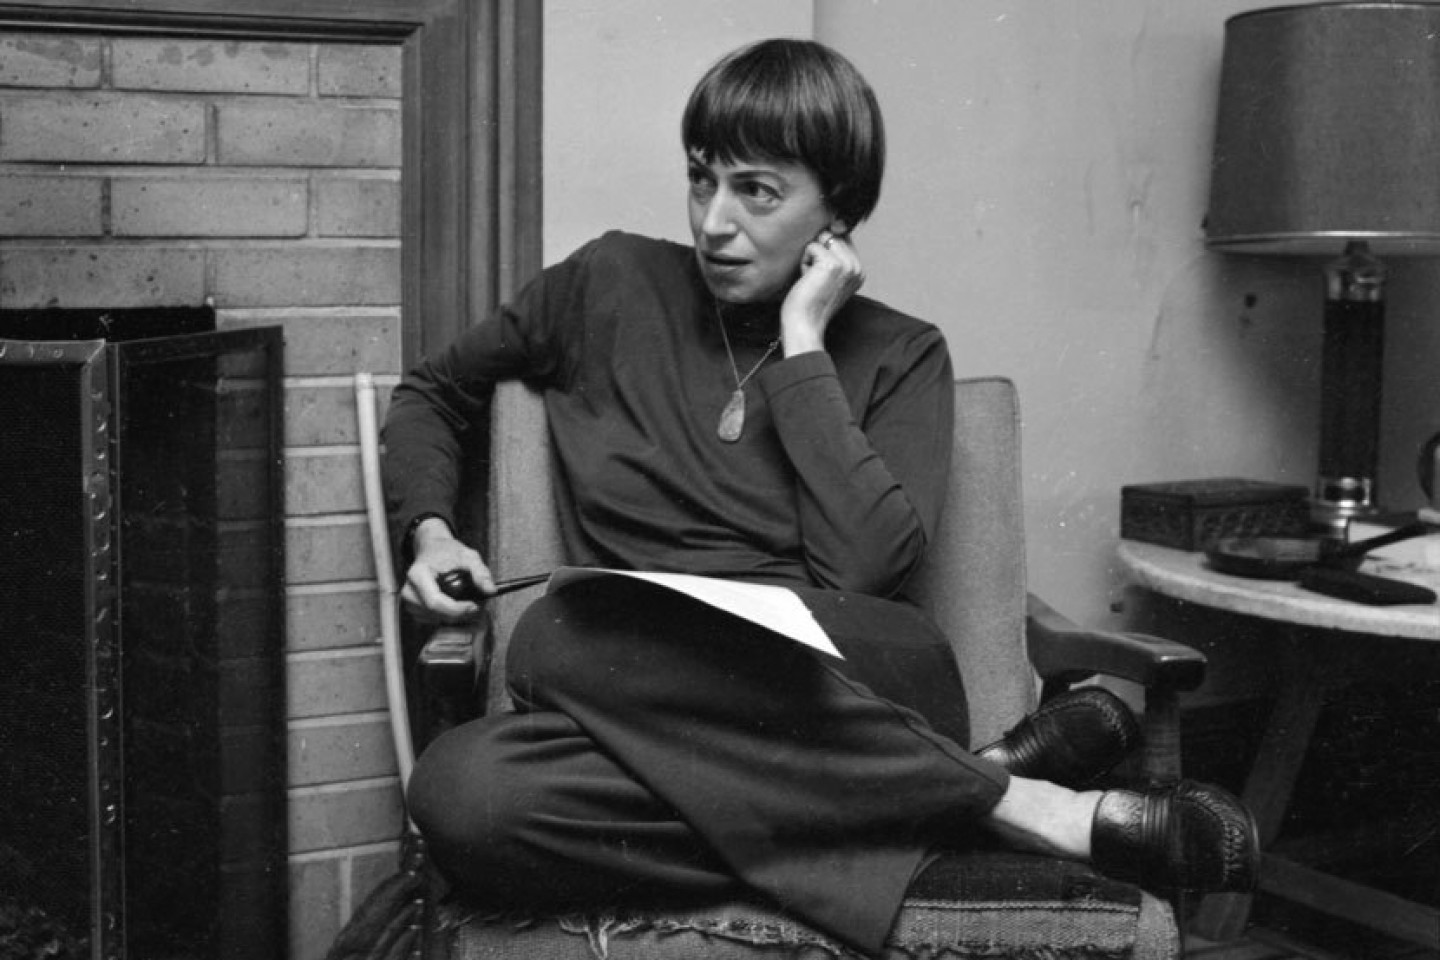 Ursula Le Guin in the 1970s, Special Collections and University Archives, University of Oregon Librairies